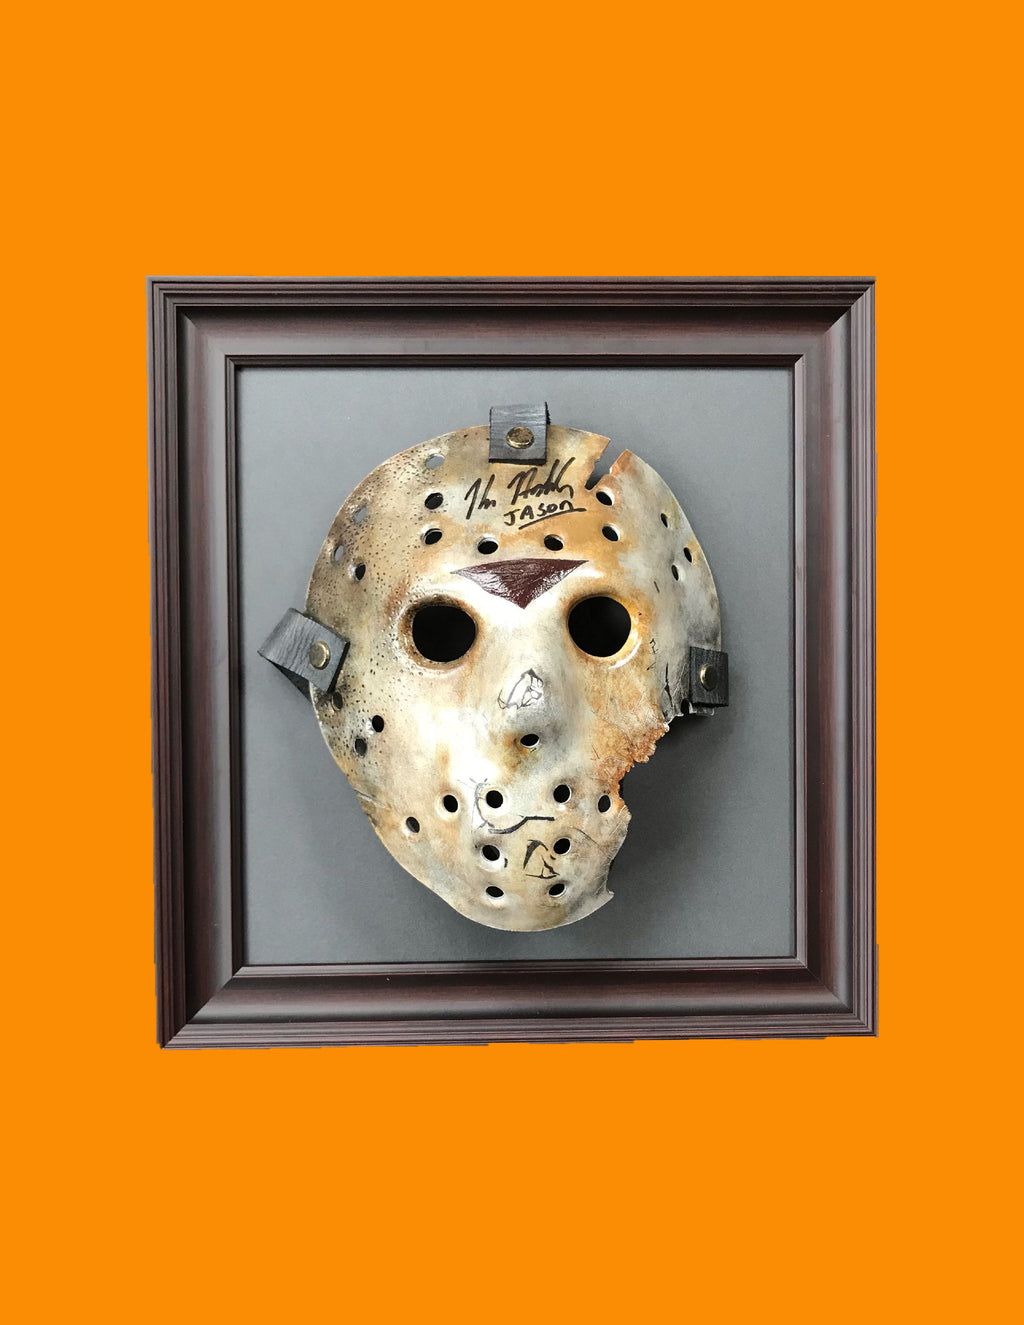 Friday 13th Part VII: The New Blood (1988) - A Signed Replica Hockey Mask